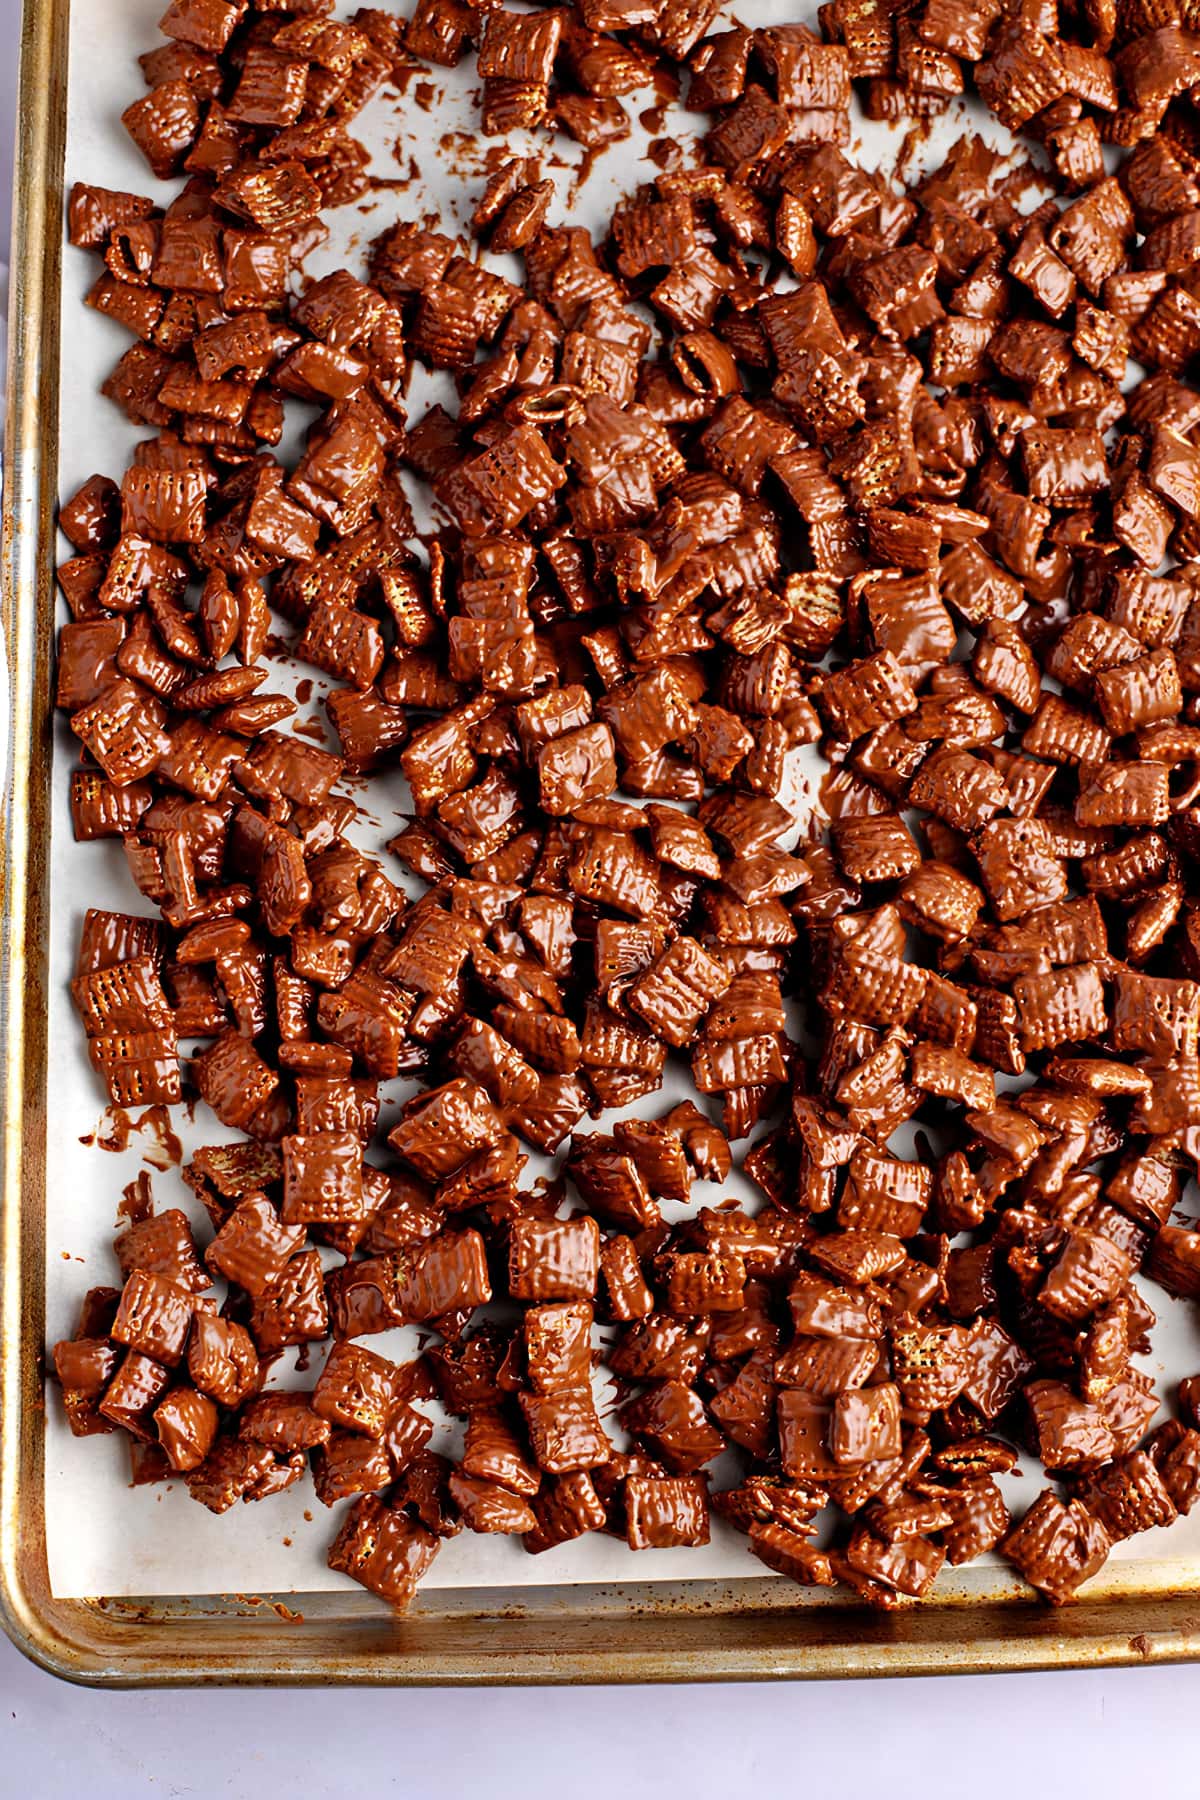 Cereals Covered with Peanut Butter on a Baking Sheet